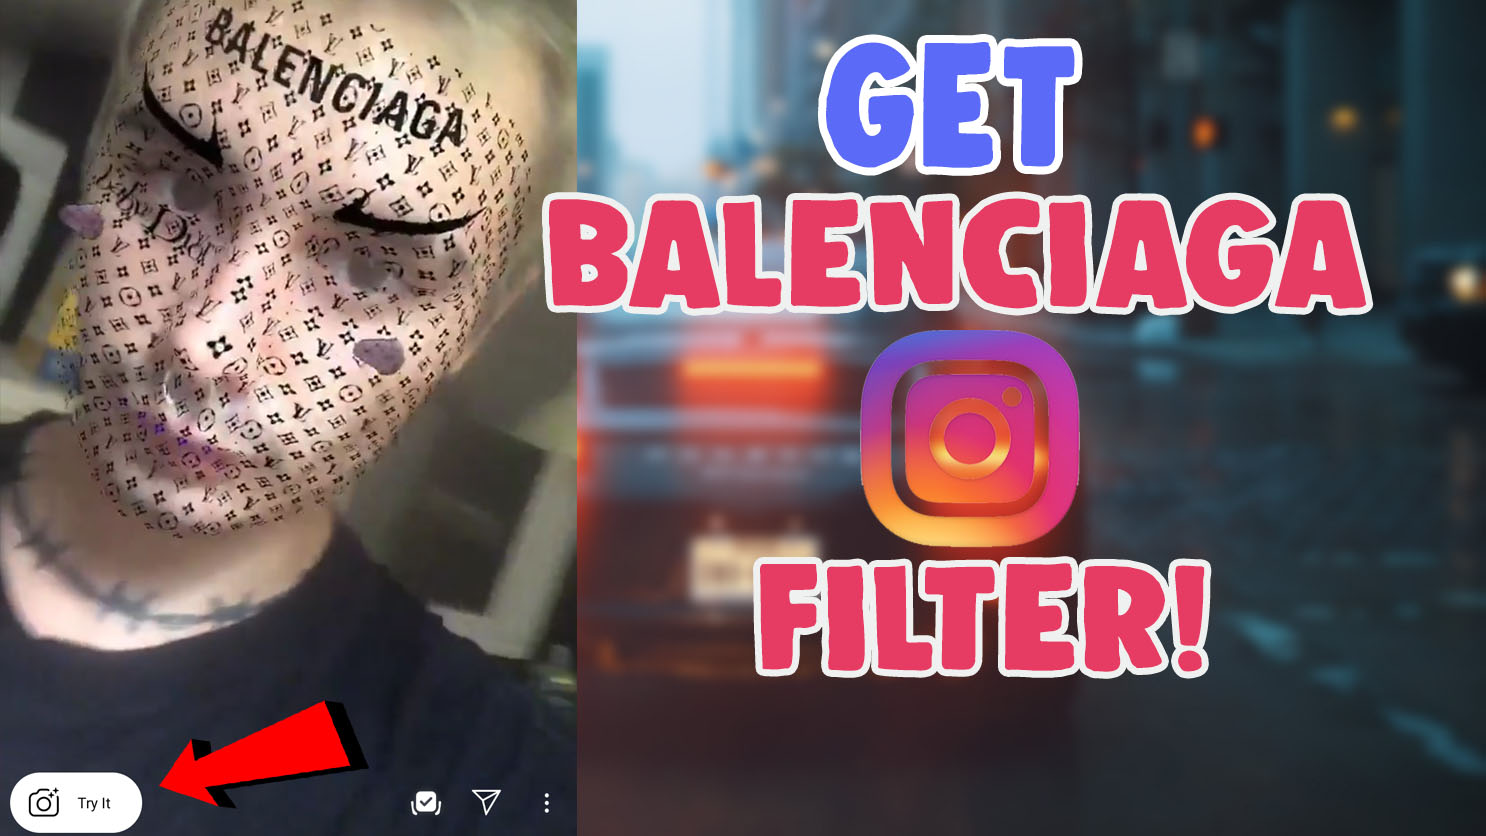 How To Get Balenciaga Filter On Instagram and Snapchat - SALU NETWORK